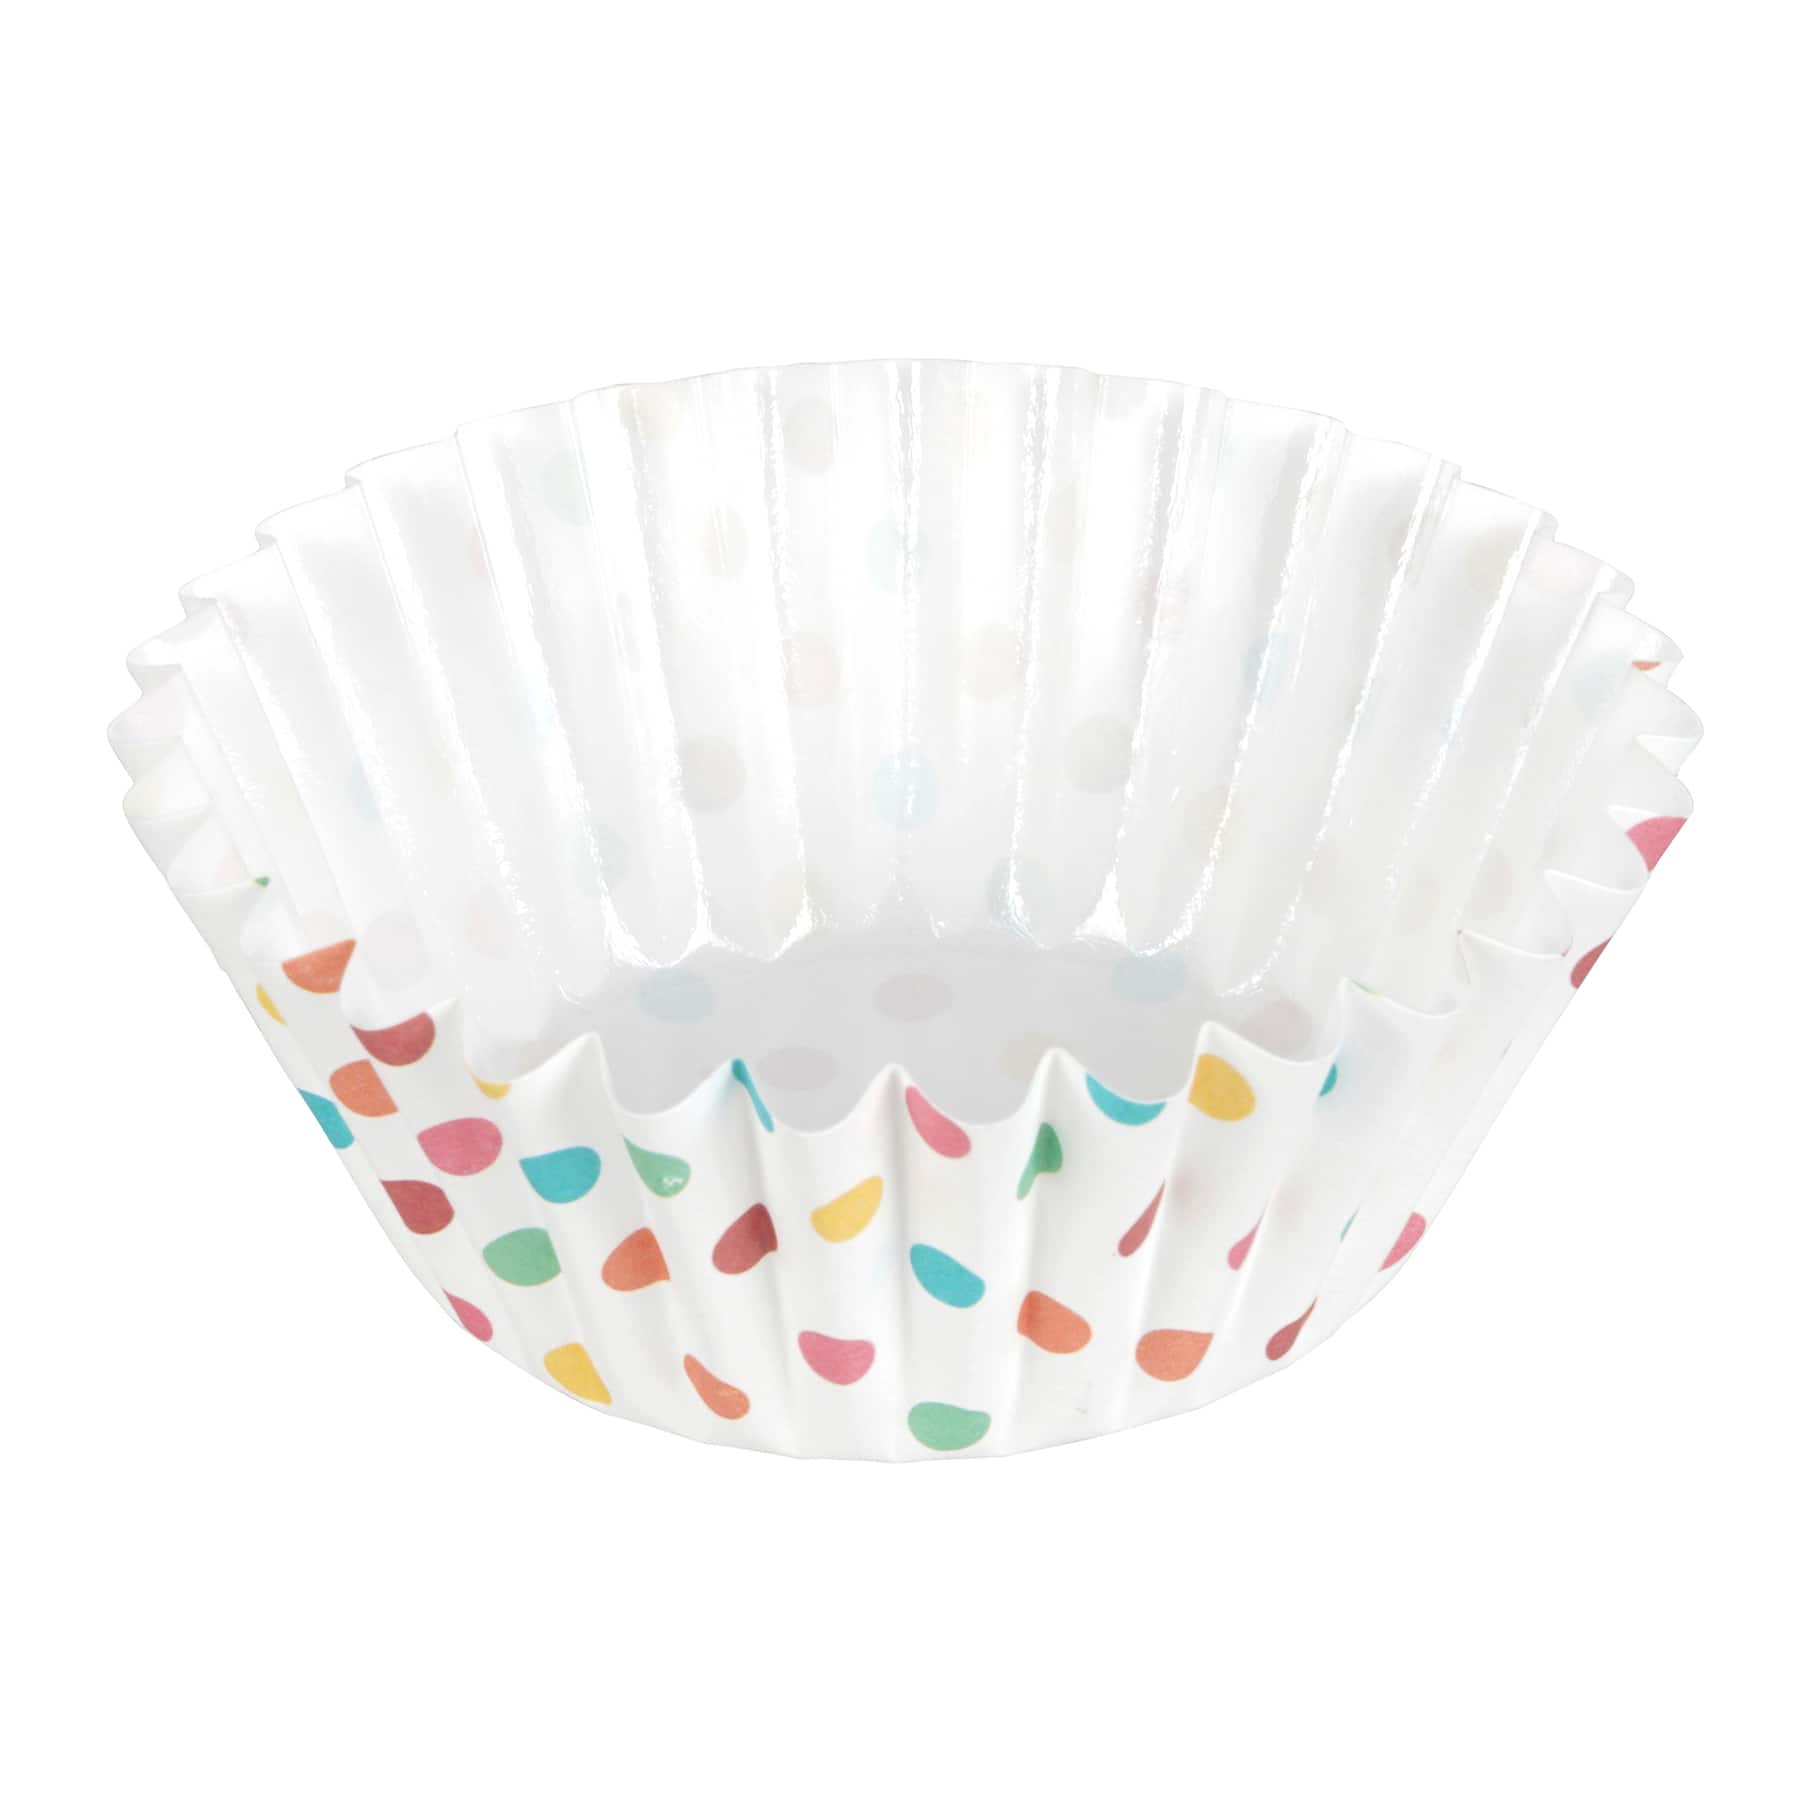 12 Packs: 36 ct. (432 total) Multicolor Polka Dot Grease Resistant Baking Cups by Celebrate It&#xAE;